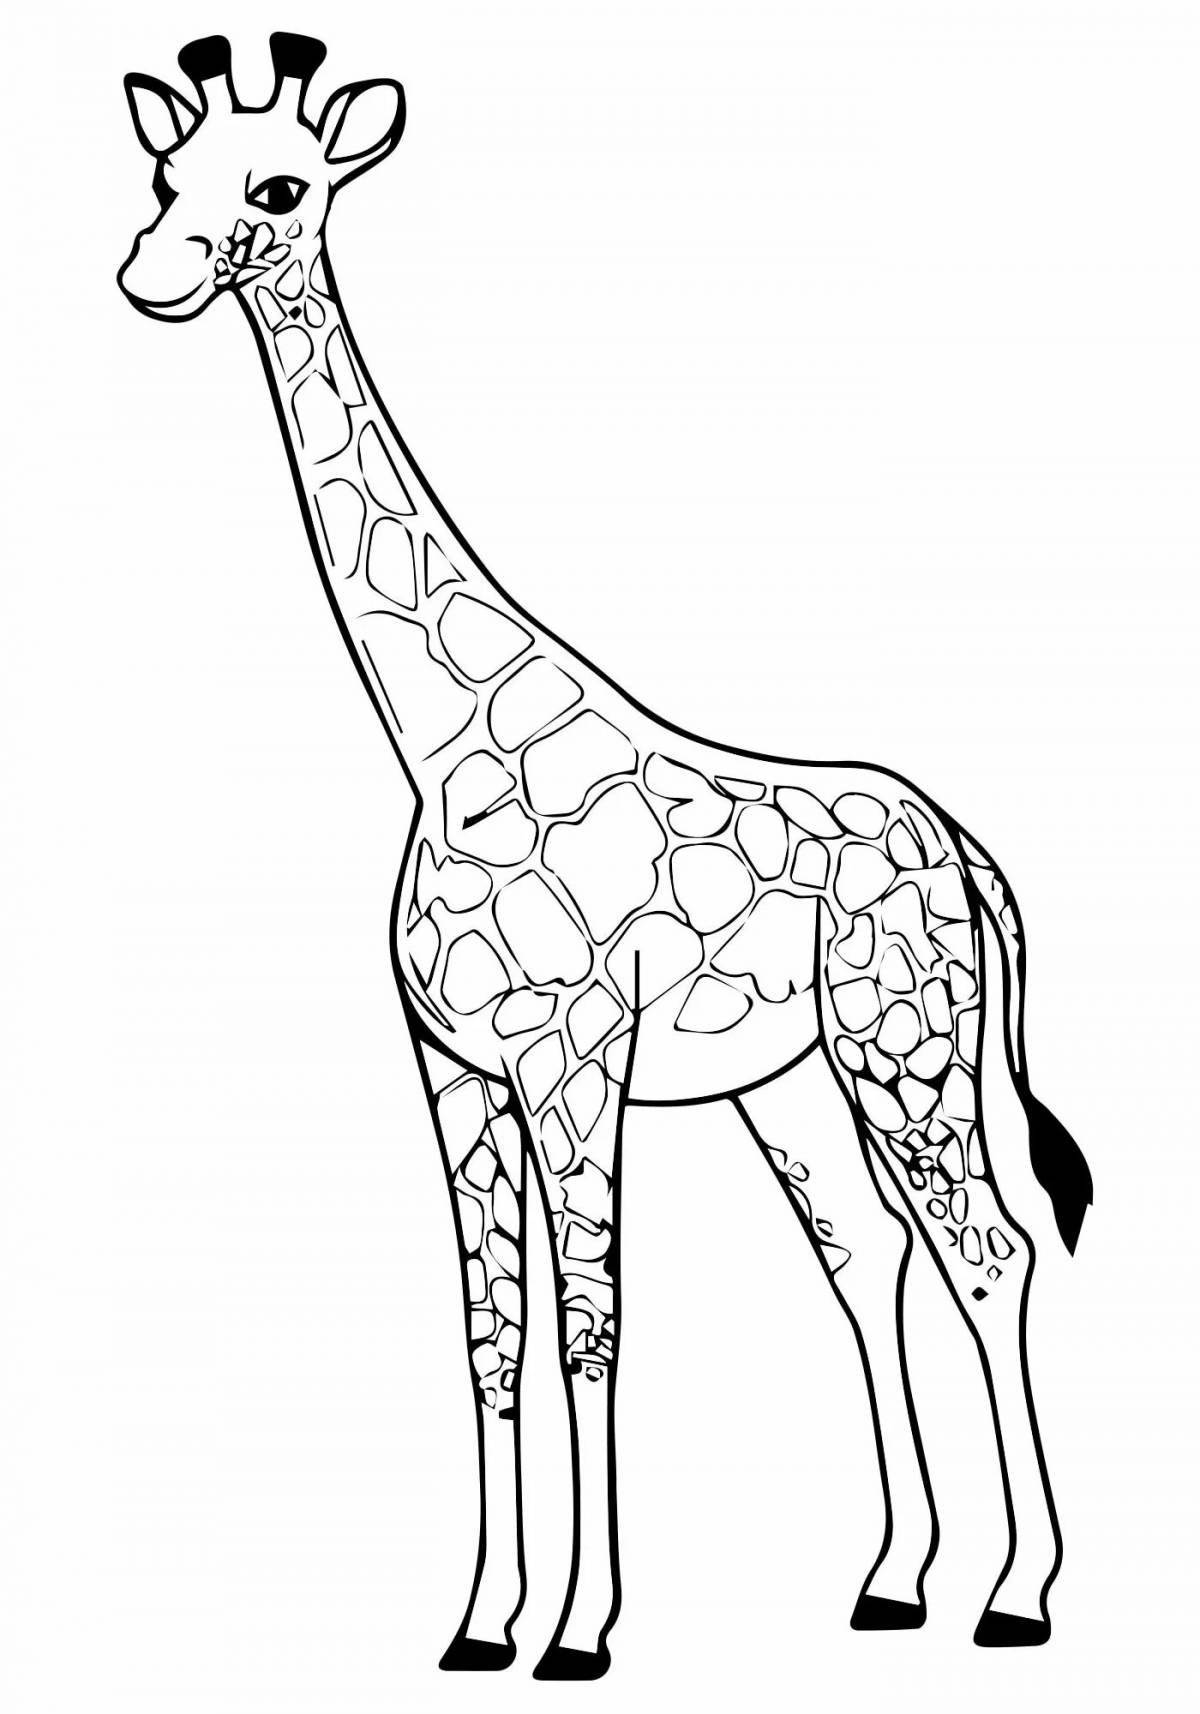 Outstanding giraffe coloring page for kids